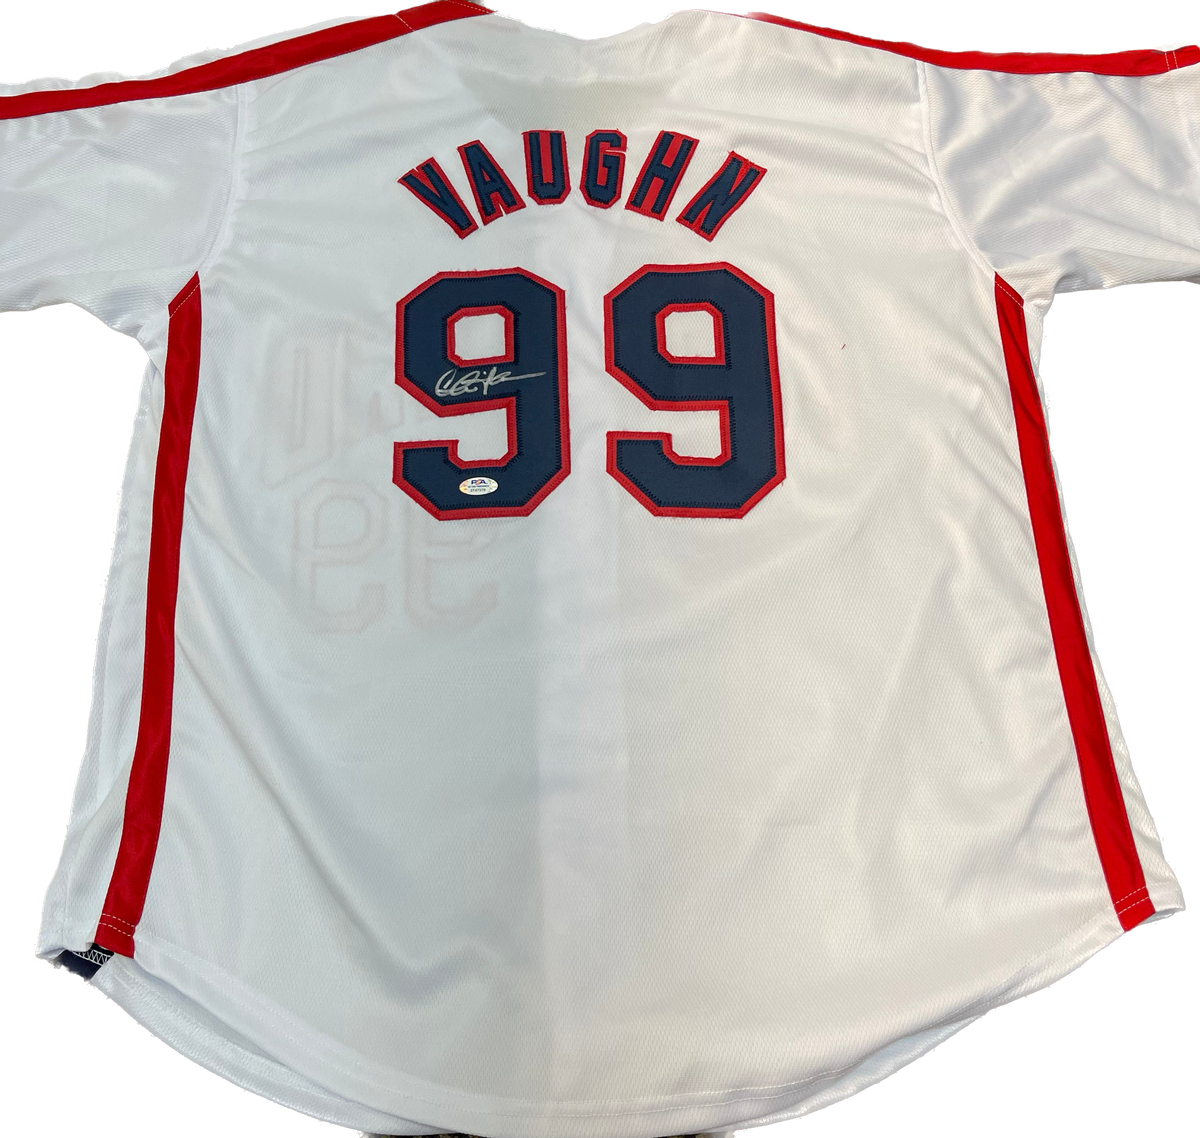 wild thing indians jersey